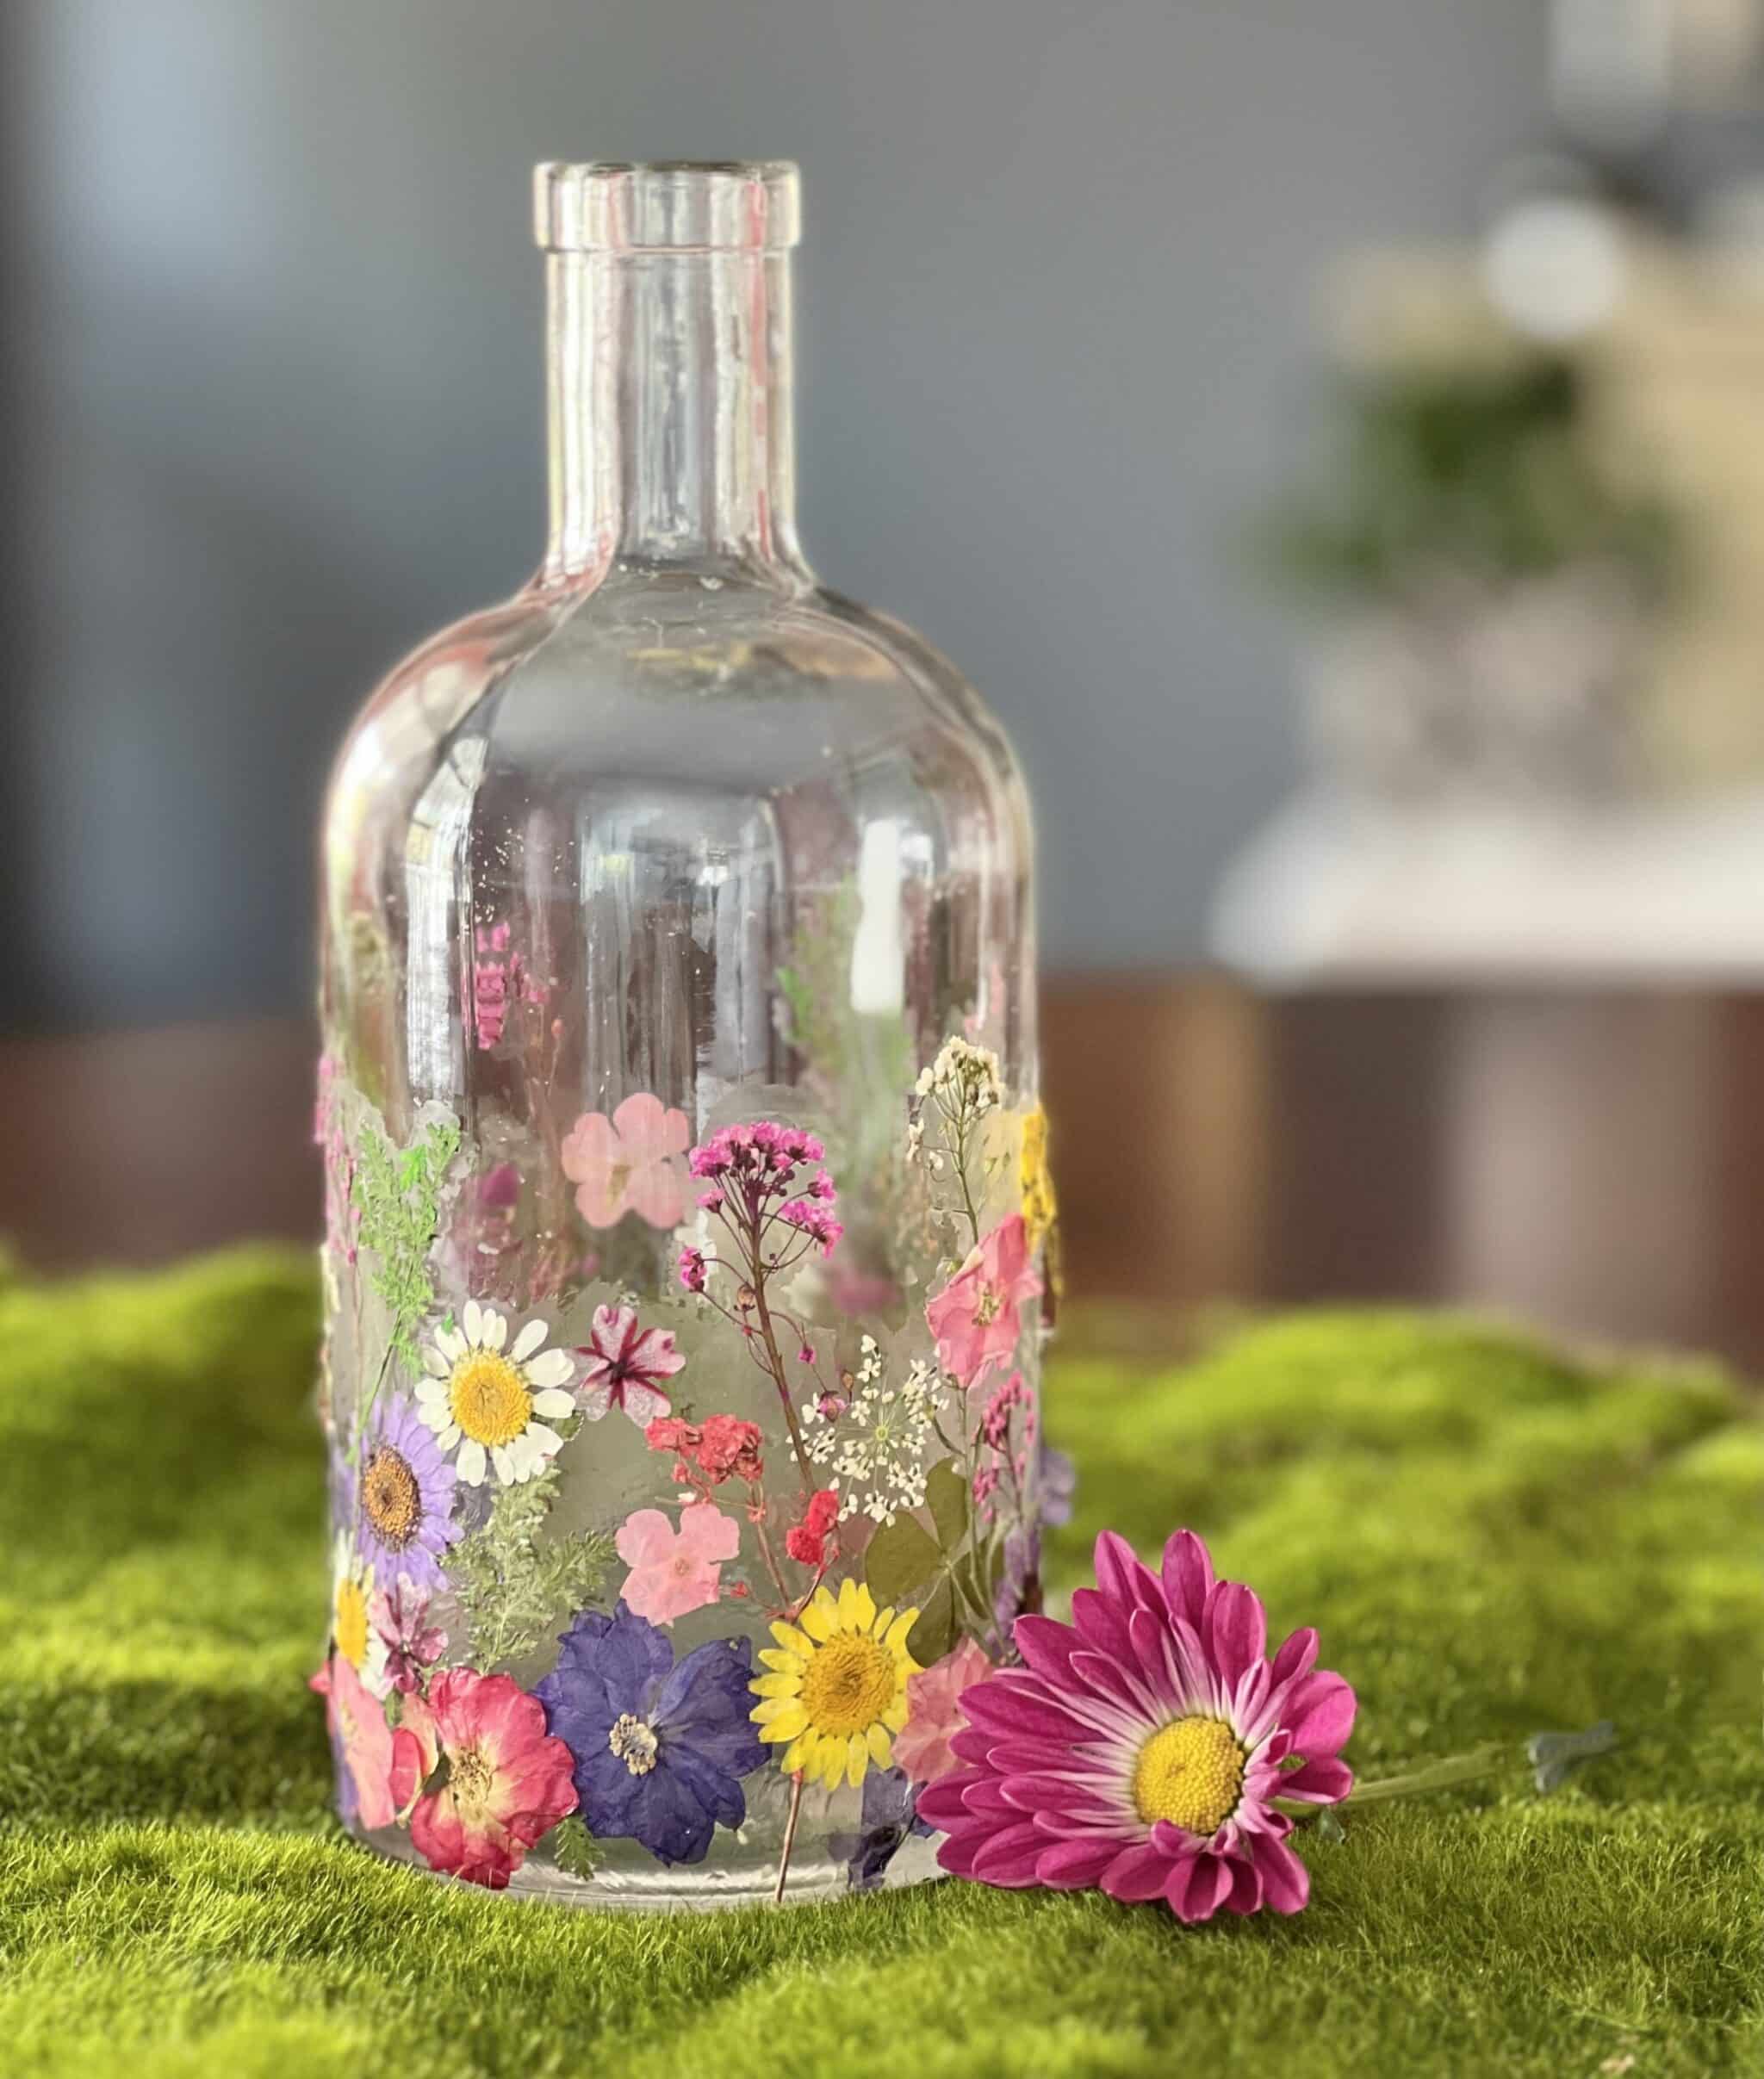 The Easiest Pressed Flower Vase Decor for Your Kitchen